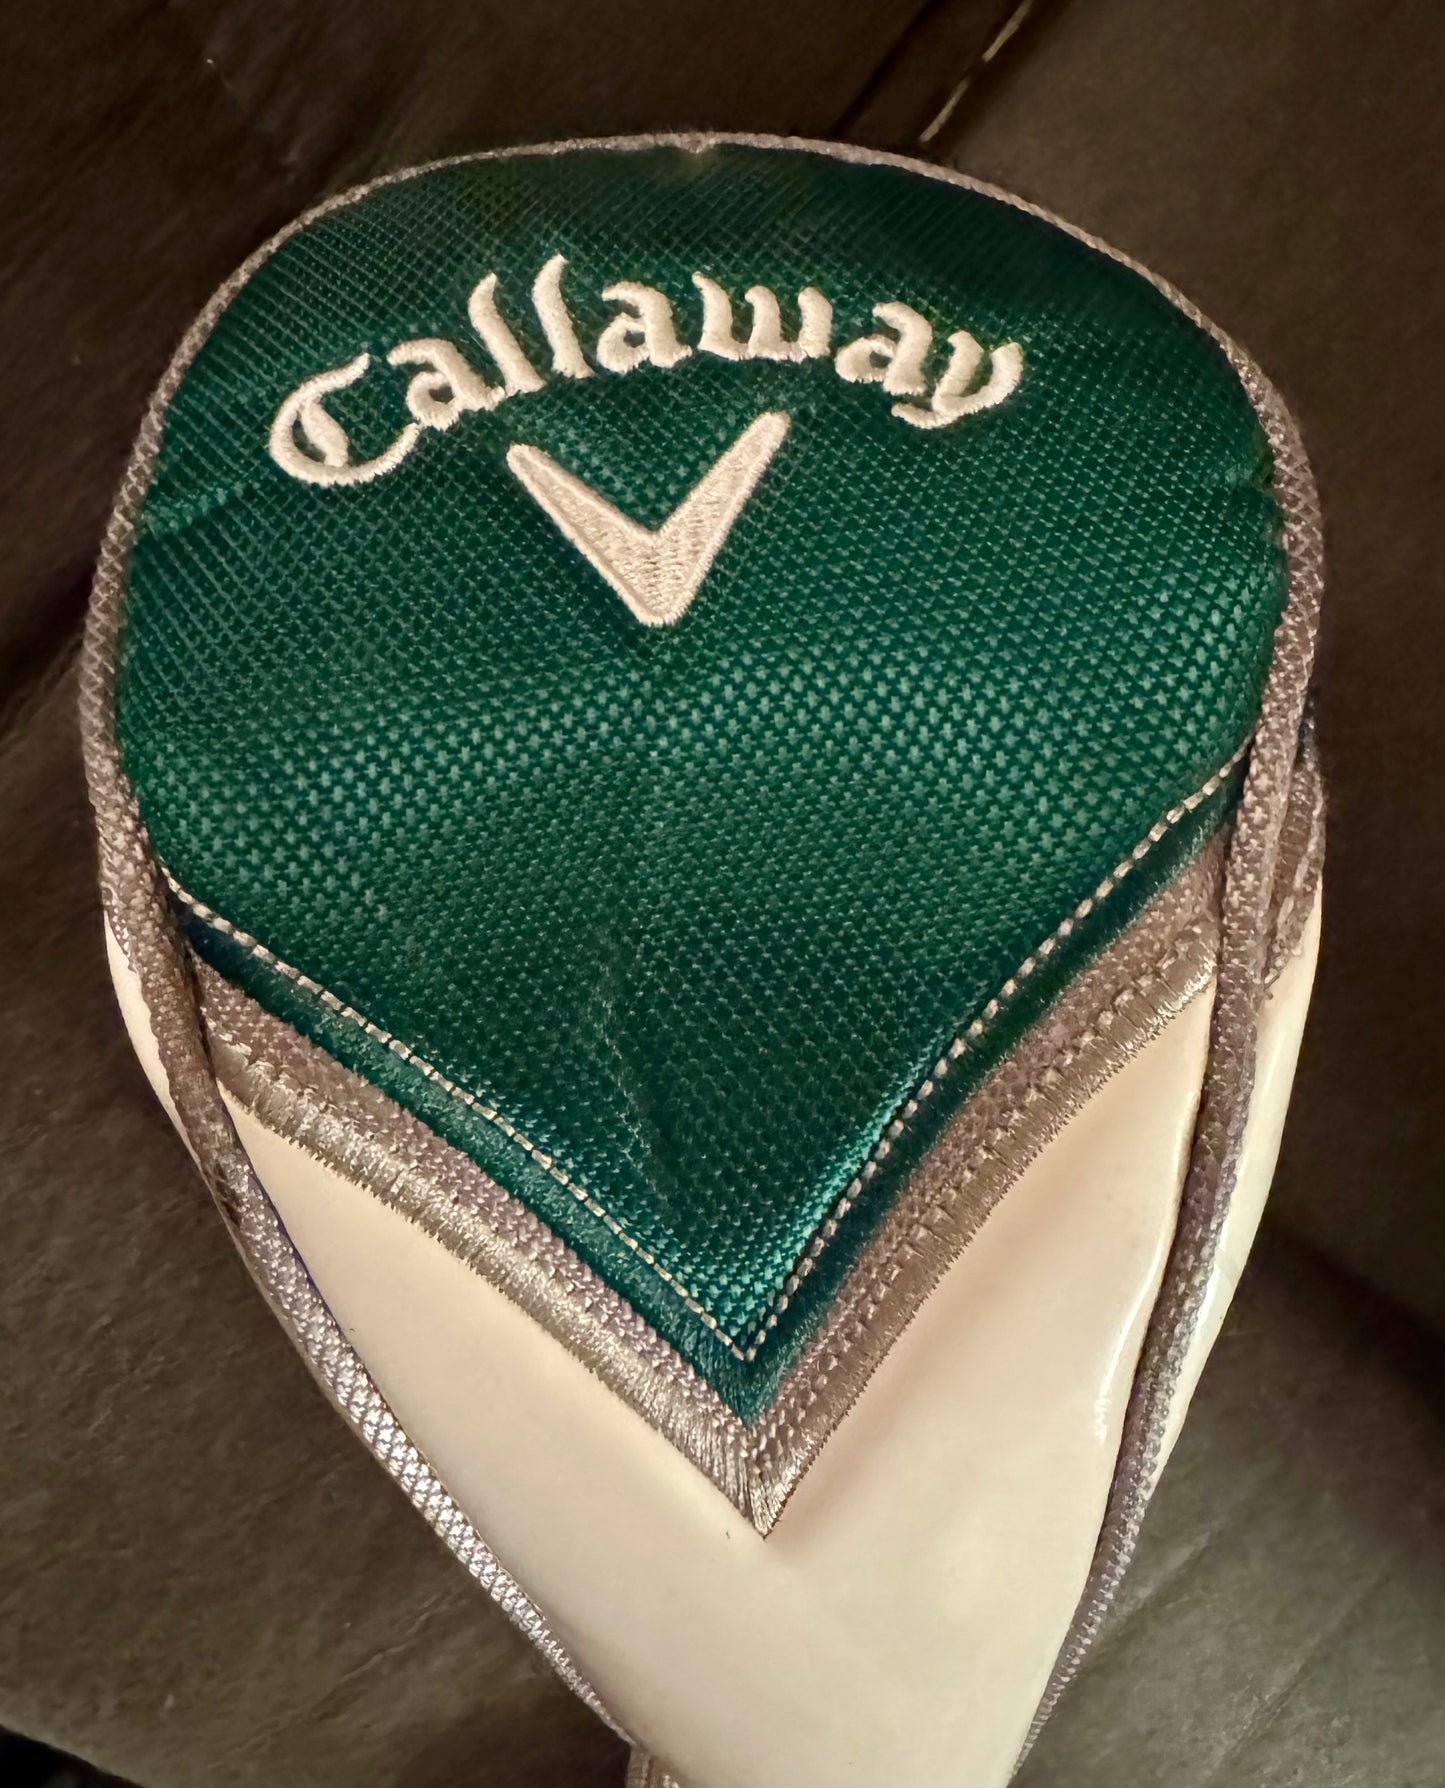 2 Vintage Callaway Headcovers - 3 & D included - Color: Green and Cream